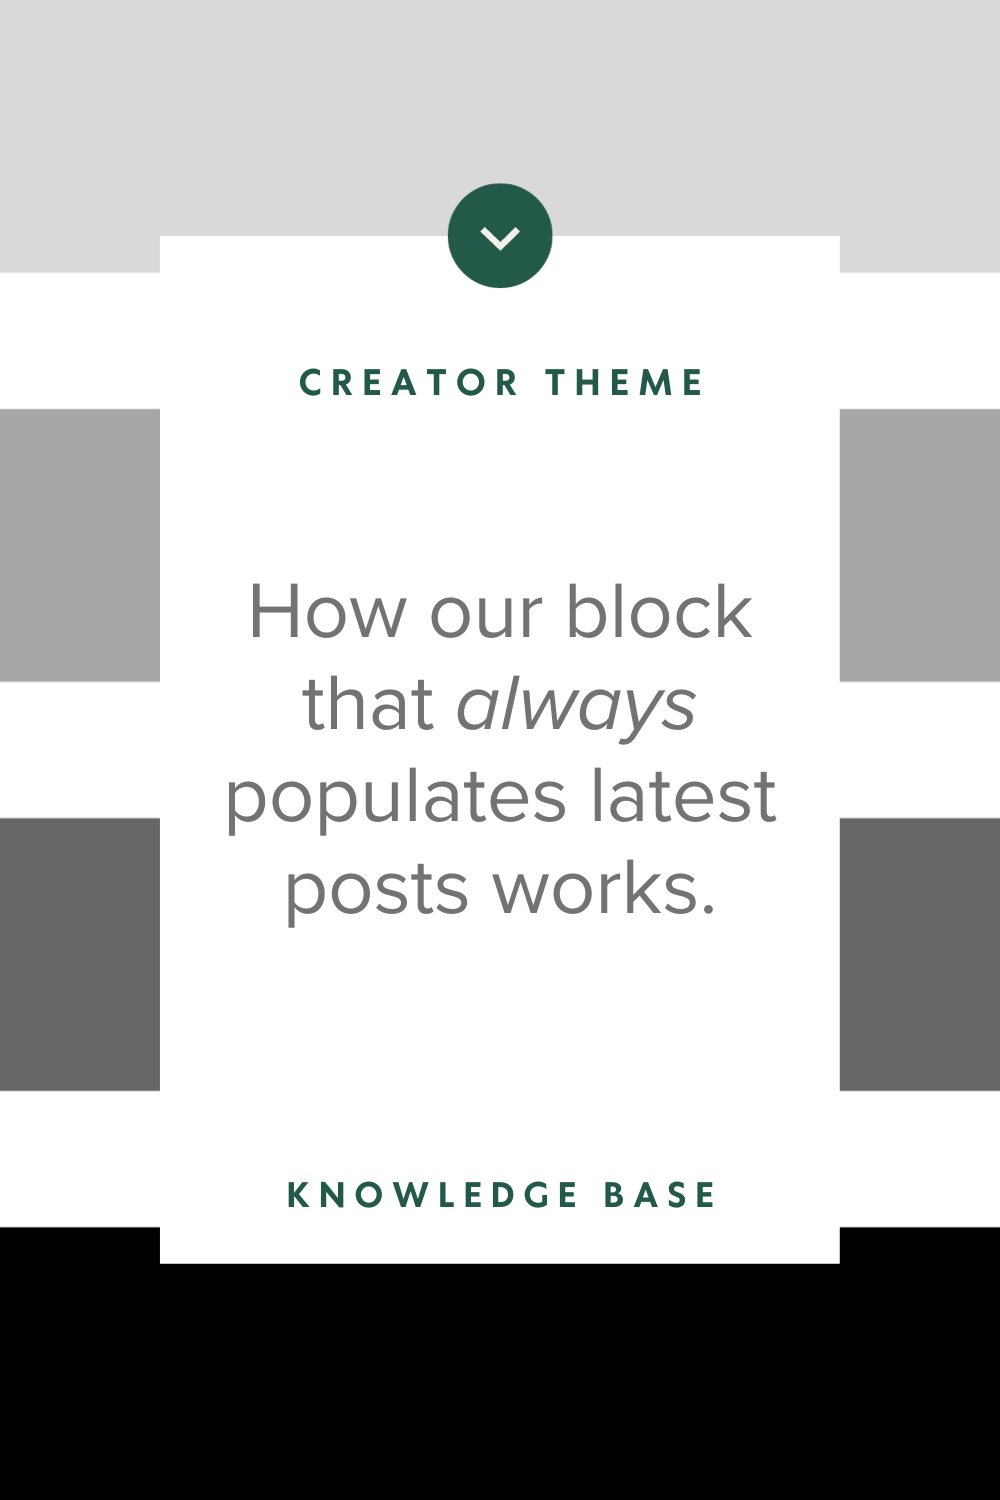 How our block that always populates latest posts works